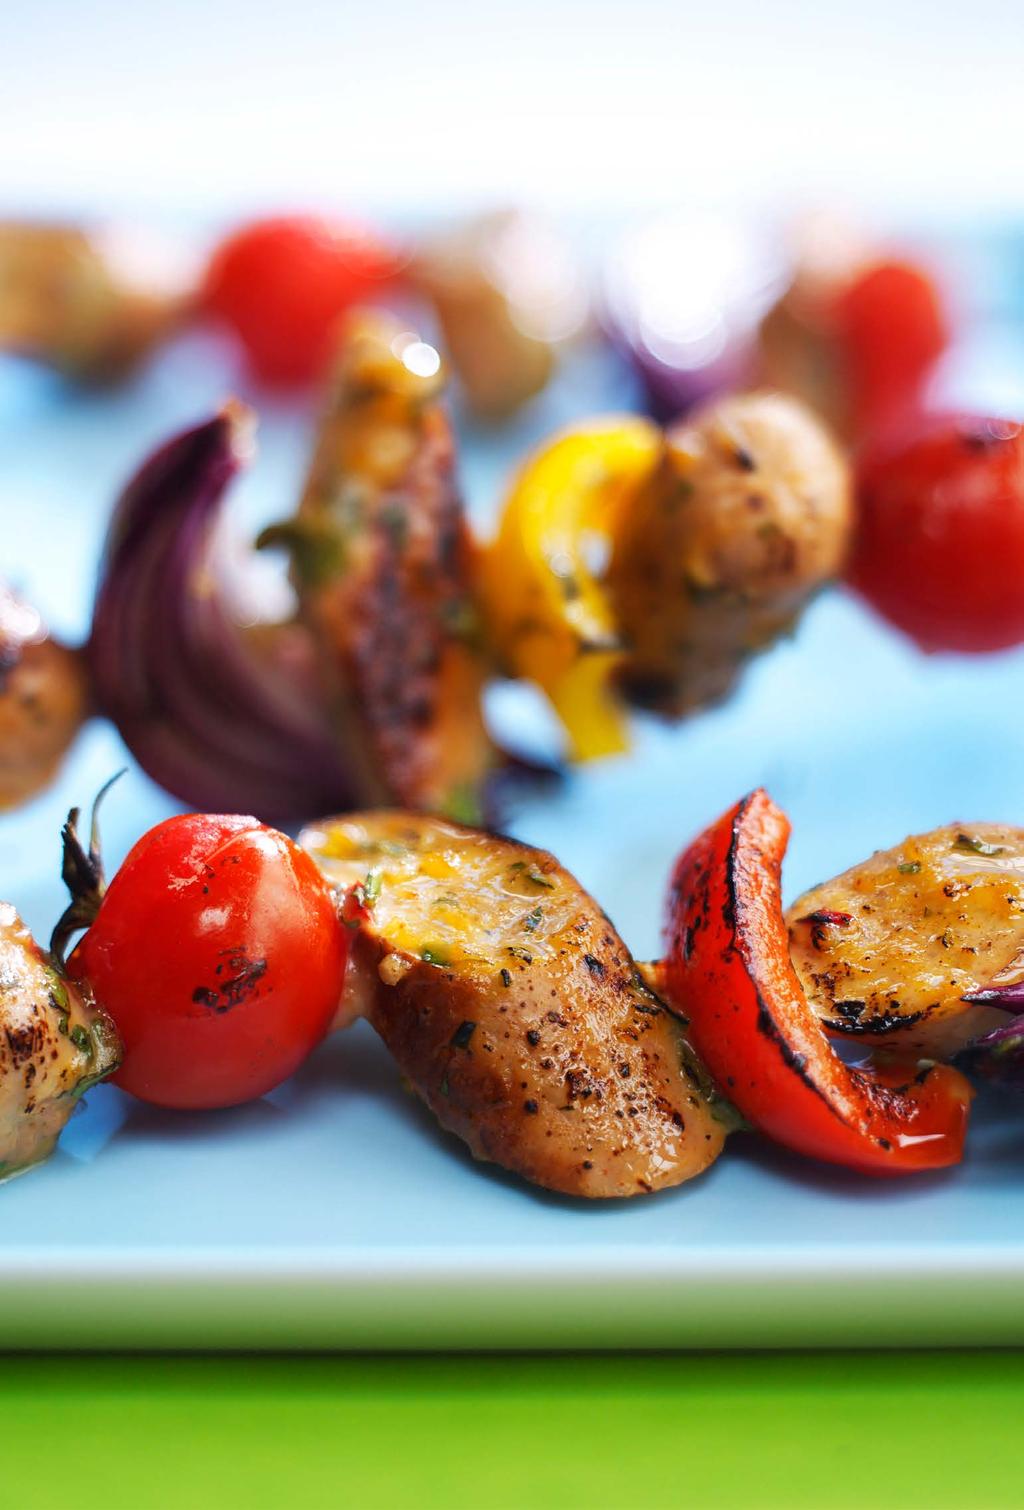 Quorn Sausage & Vegetable Sticky Skewers HINTS & TIPS They are equally good roasted in the oven 200 C / Gas Mark 6 for -12 minutes. Serve with a crisp green salad and sweet potato wedges.